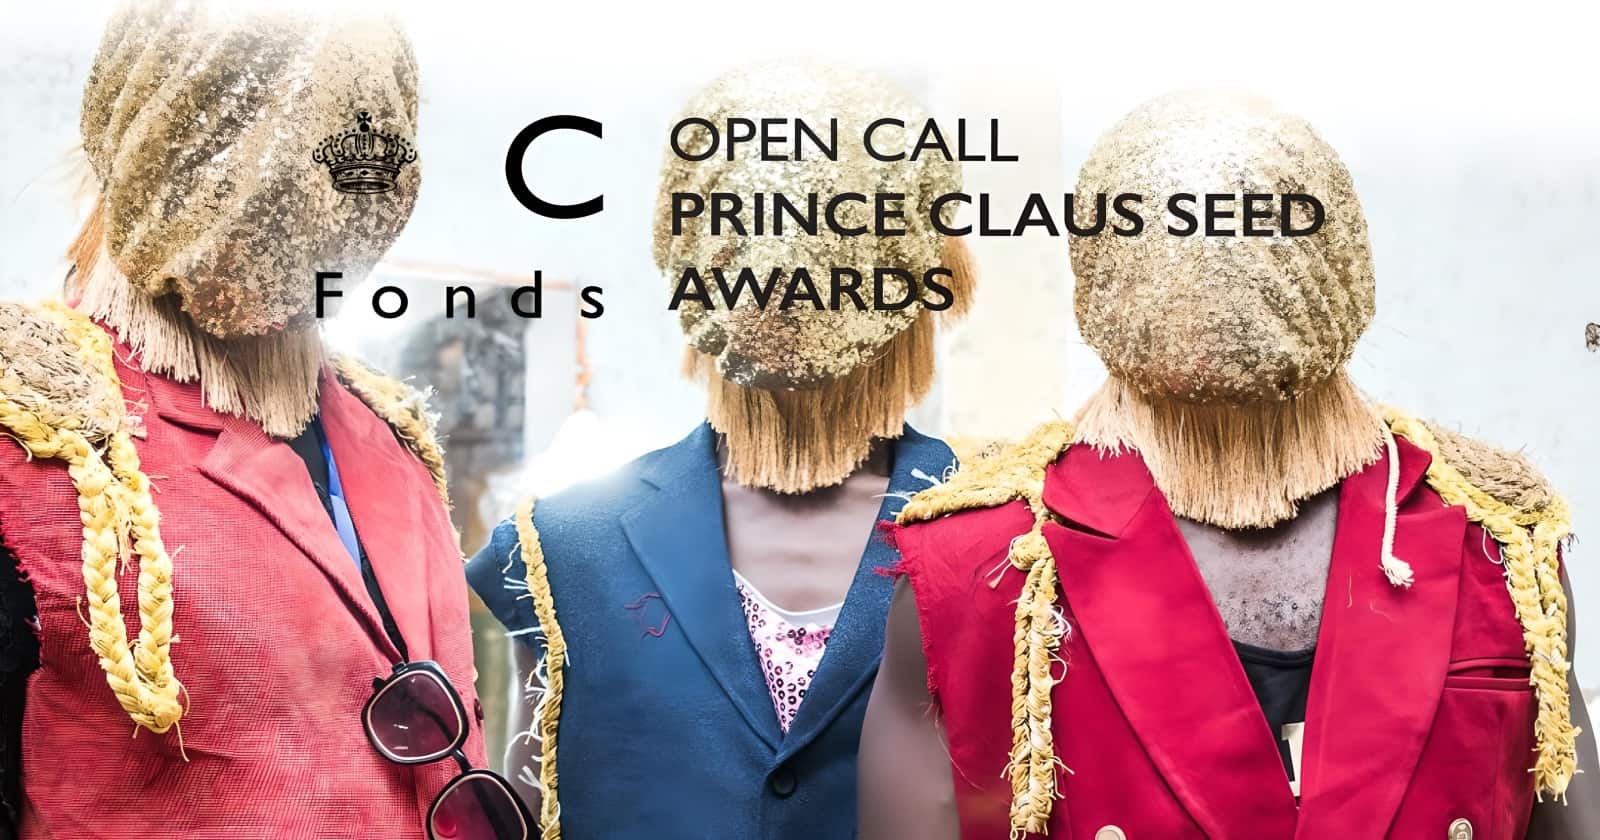 The Prince Claus Seed Awards